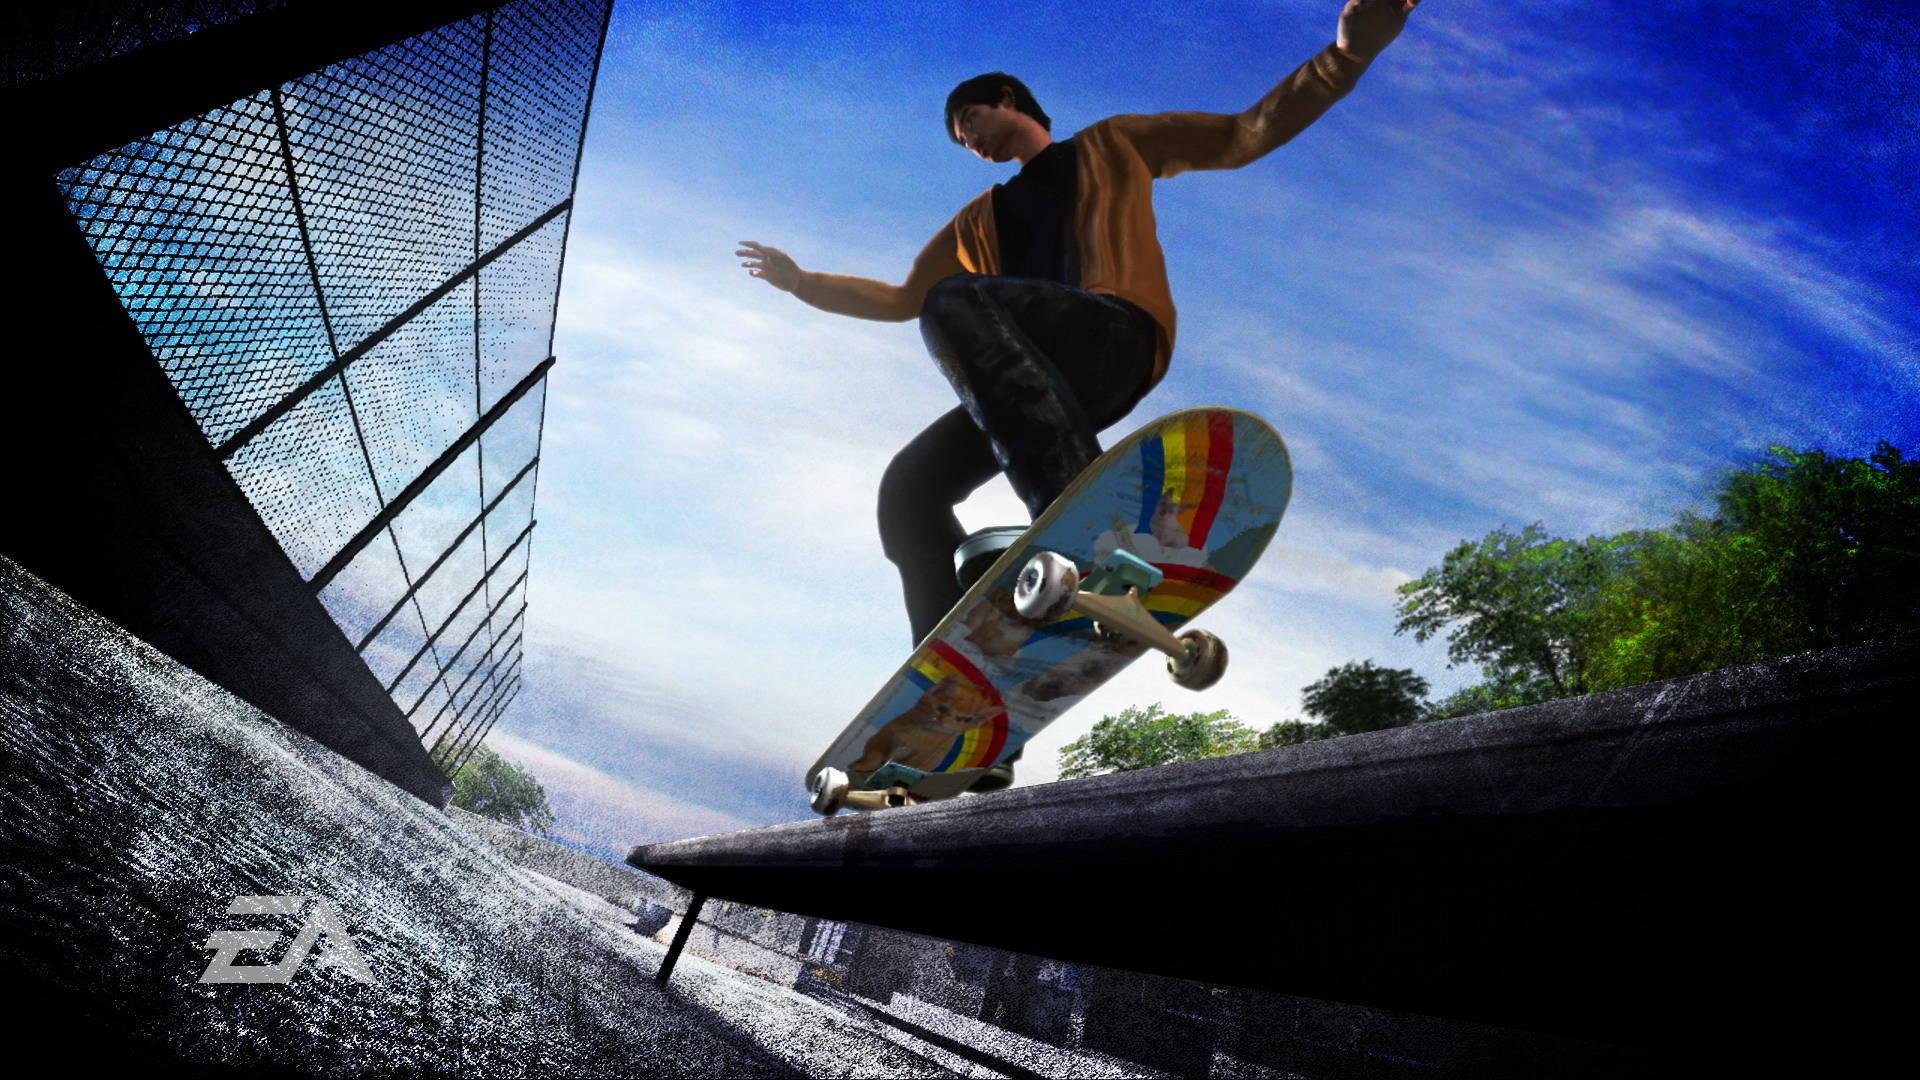 Skateboarding Wallpaper Image Photo Picture Background